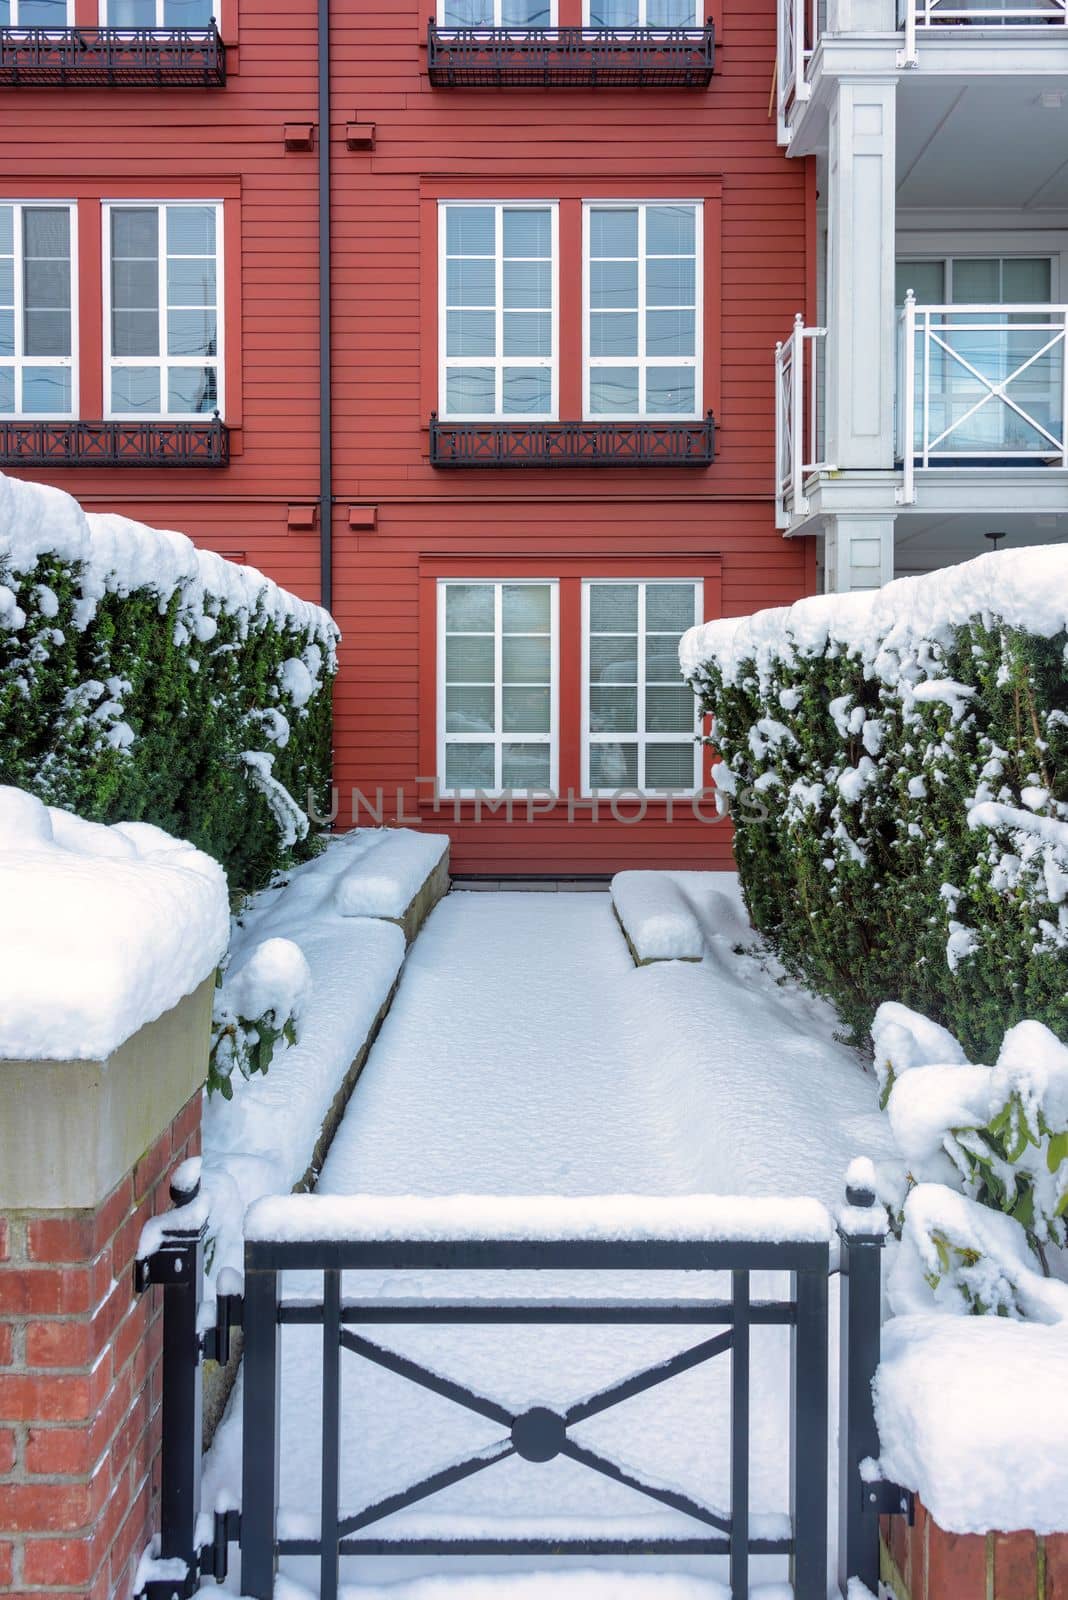 Pathway to residential building covered with snow. Residence on the winter season.